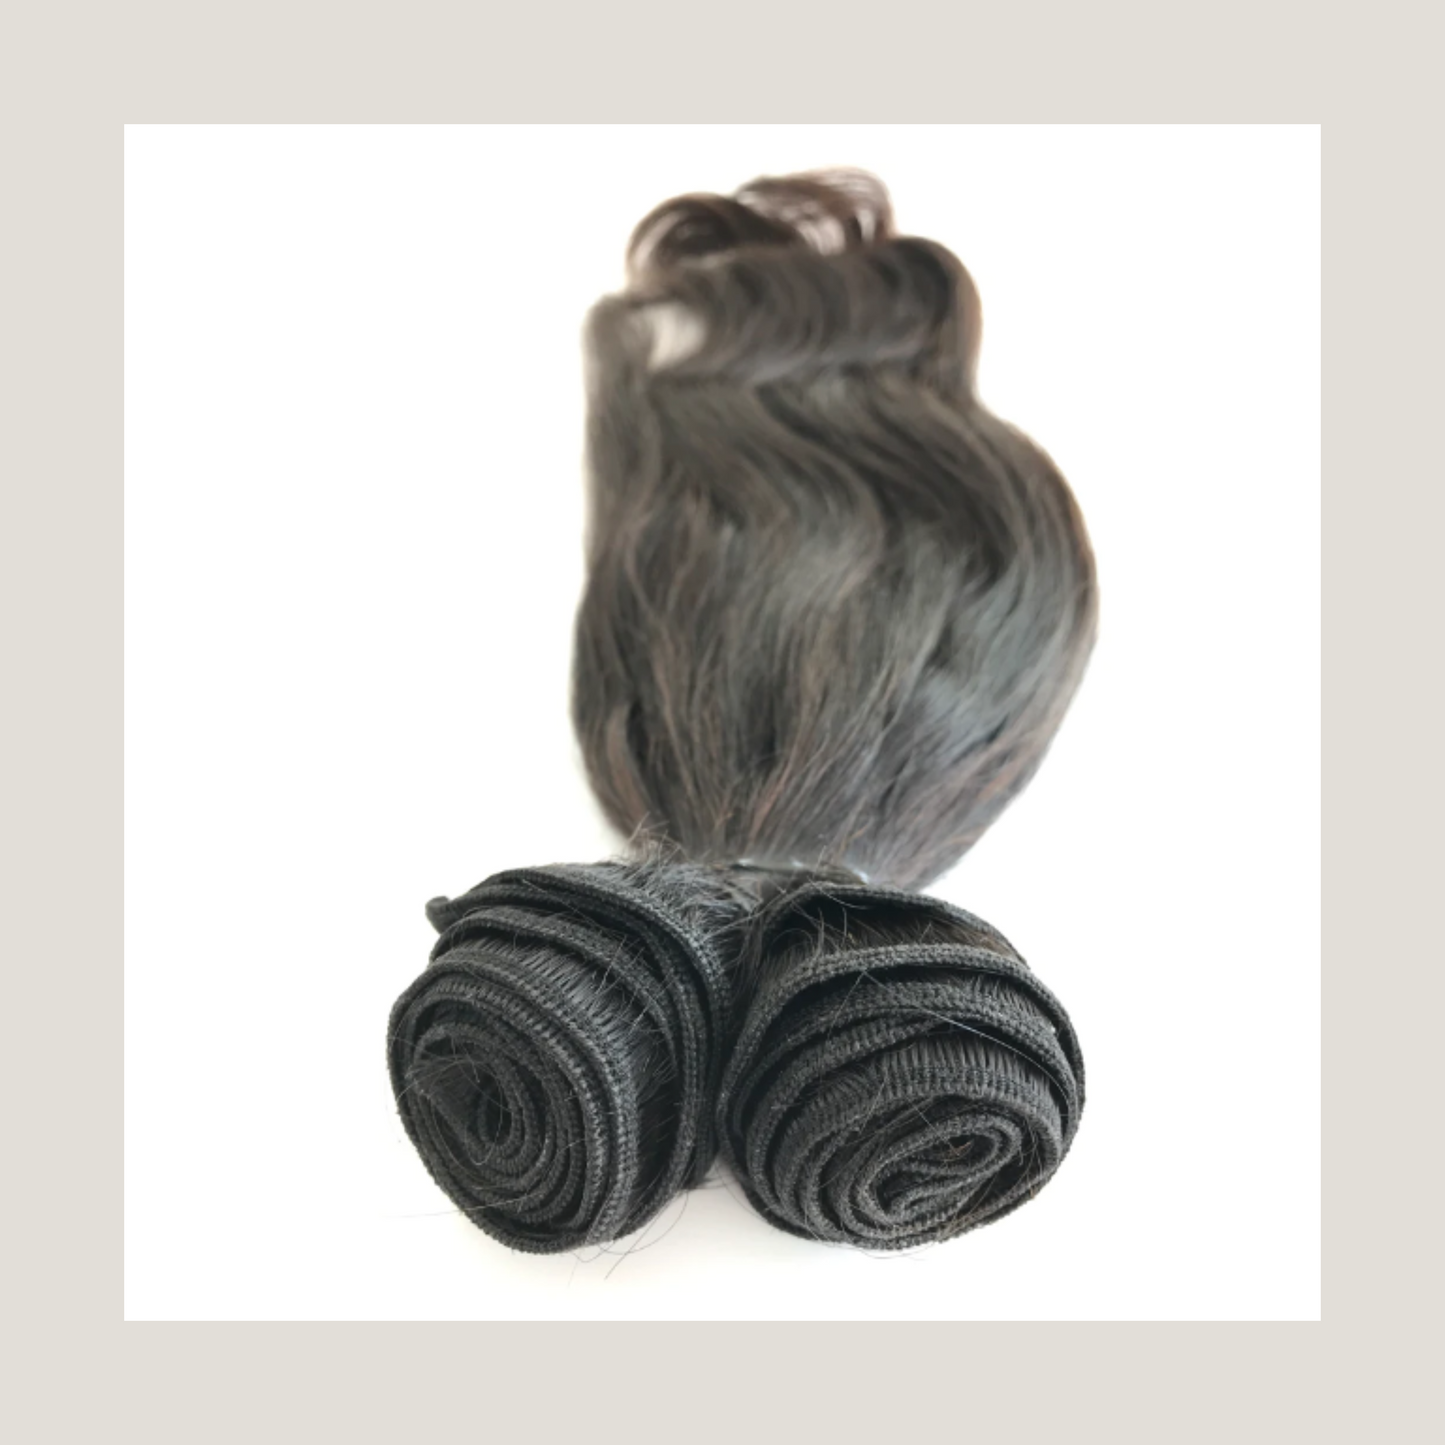 Indian Virgin Remy Human Hair, Wefts